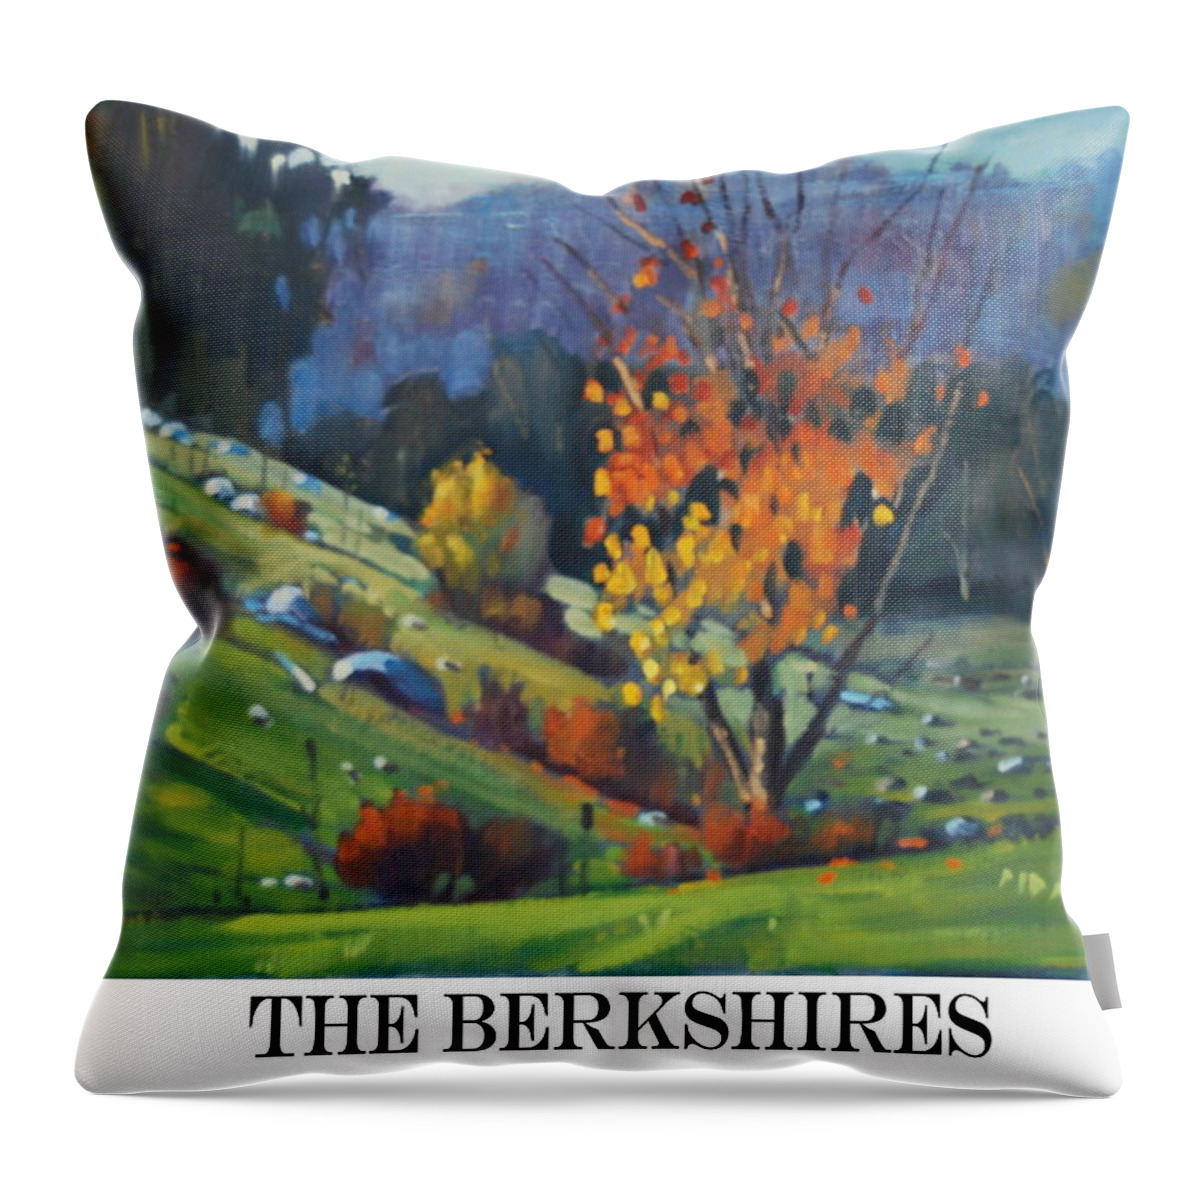 The Berkshires Throw Pillow featuring the painting the Berkshires by Len Stomski